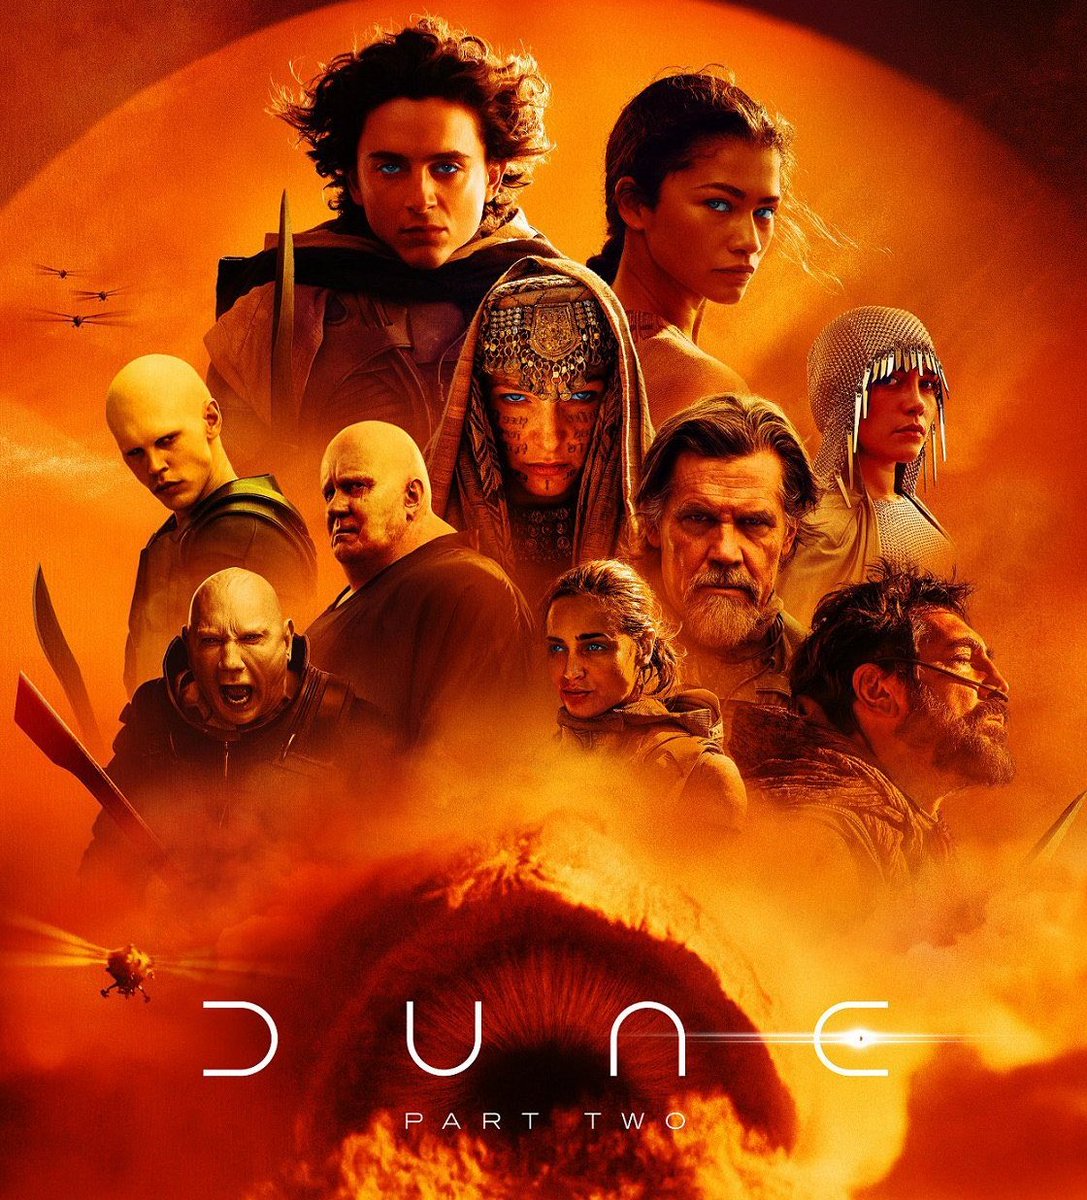 Just watched Dune 2 and my wordddd WHAT A FUCKING MASTERPIECE... The visuals, the soundtrack, the cinematography, the acting, the story, the science fiction.... EVERYTHING WAS JUST ABSOLUTELY PERFECT!!!!